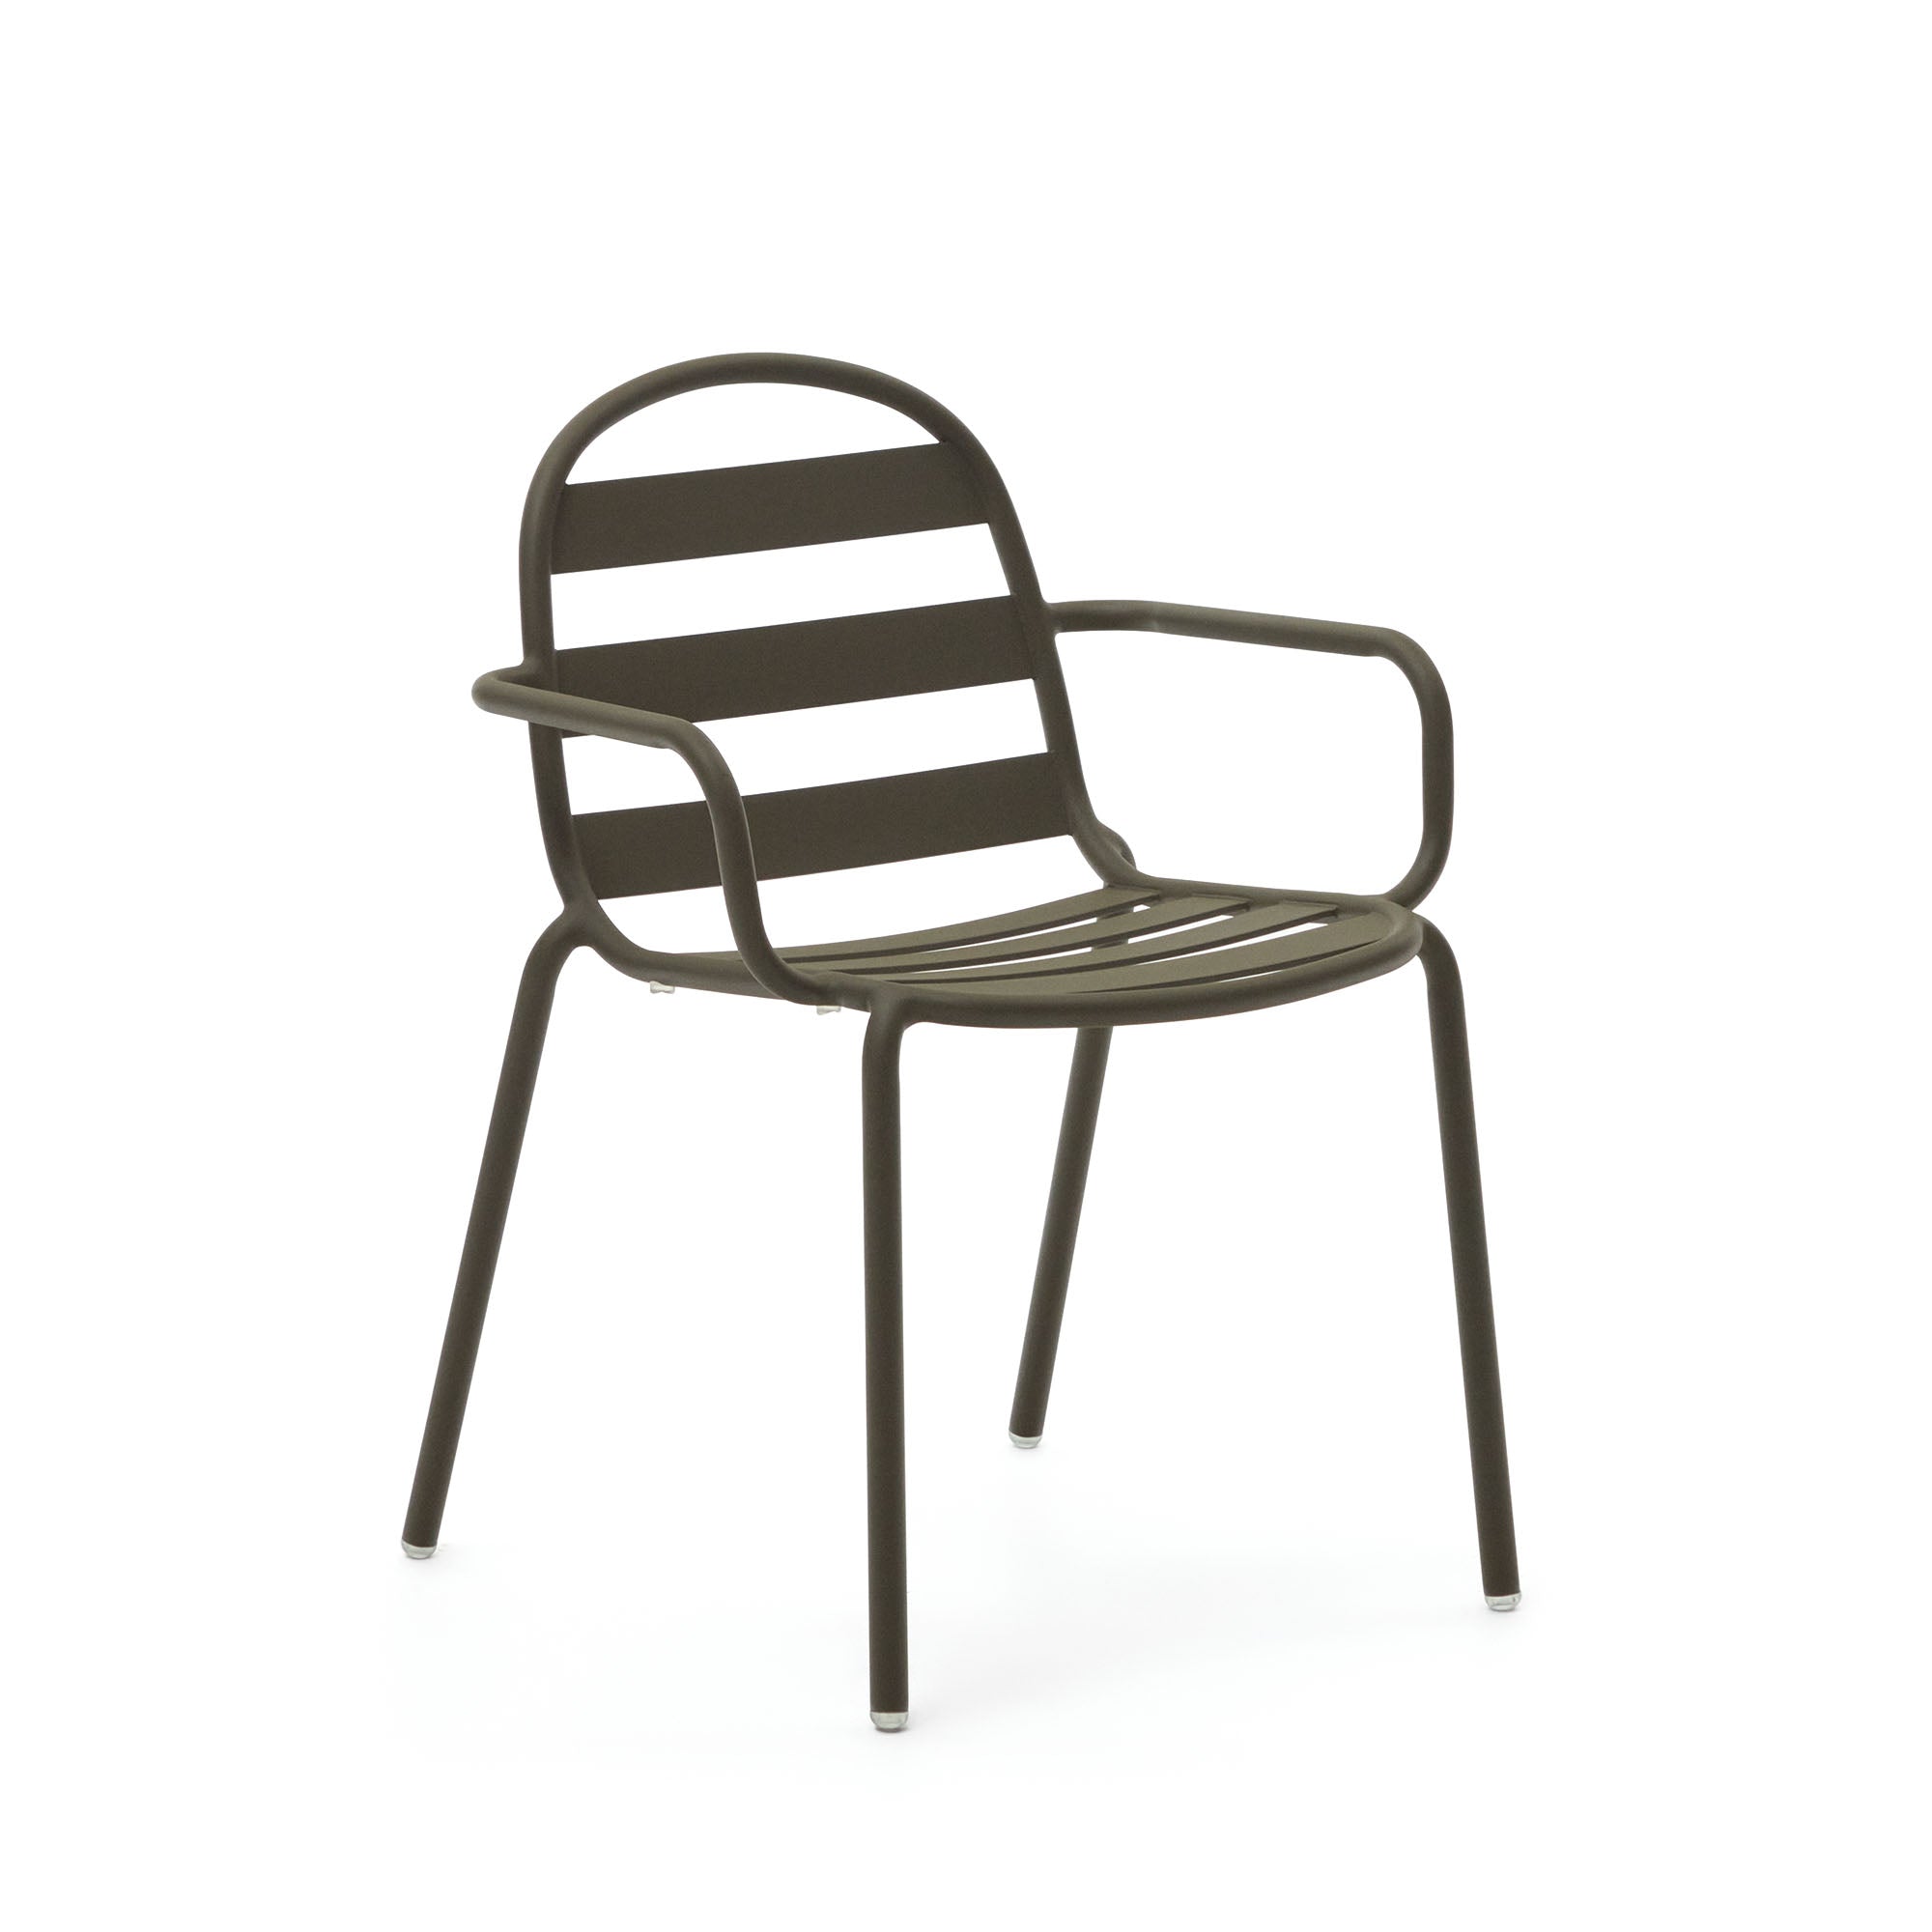 Joncols stackable outdoor aluminium chair with a powder coated green finish